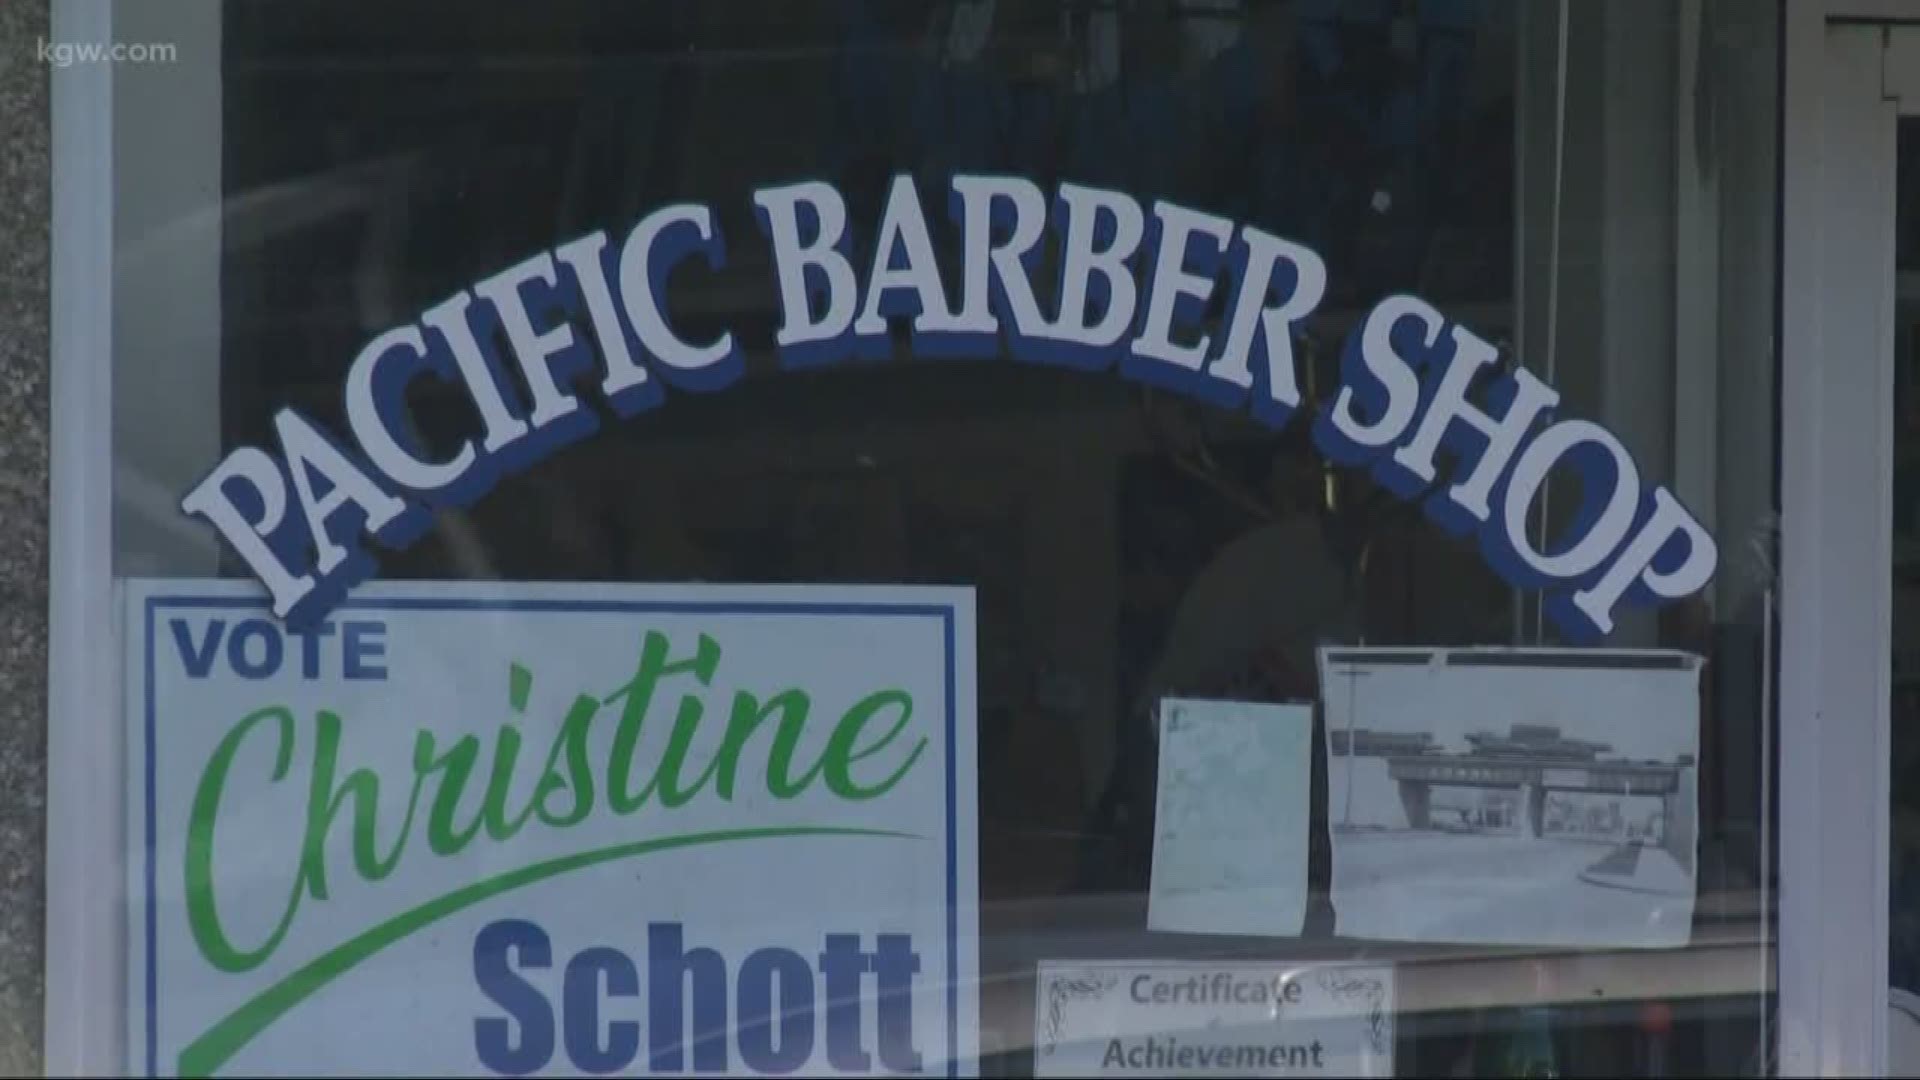 It's the end of an era. The Pacific Barbershop in Kelso will close after 85 years in business.